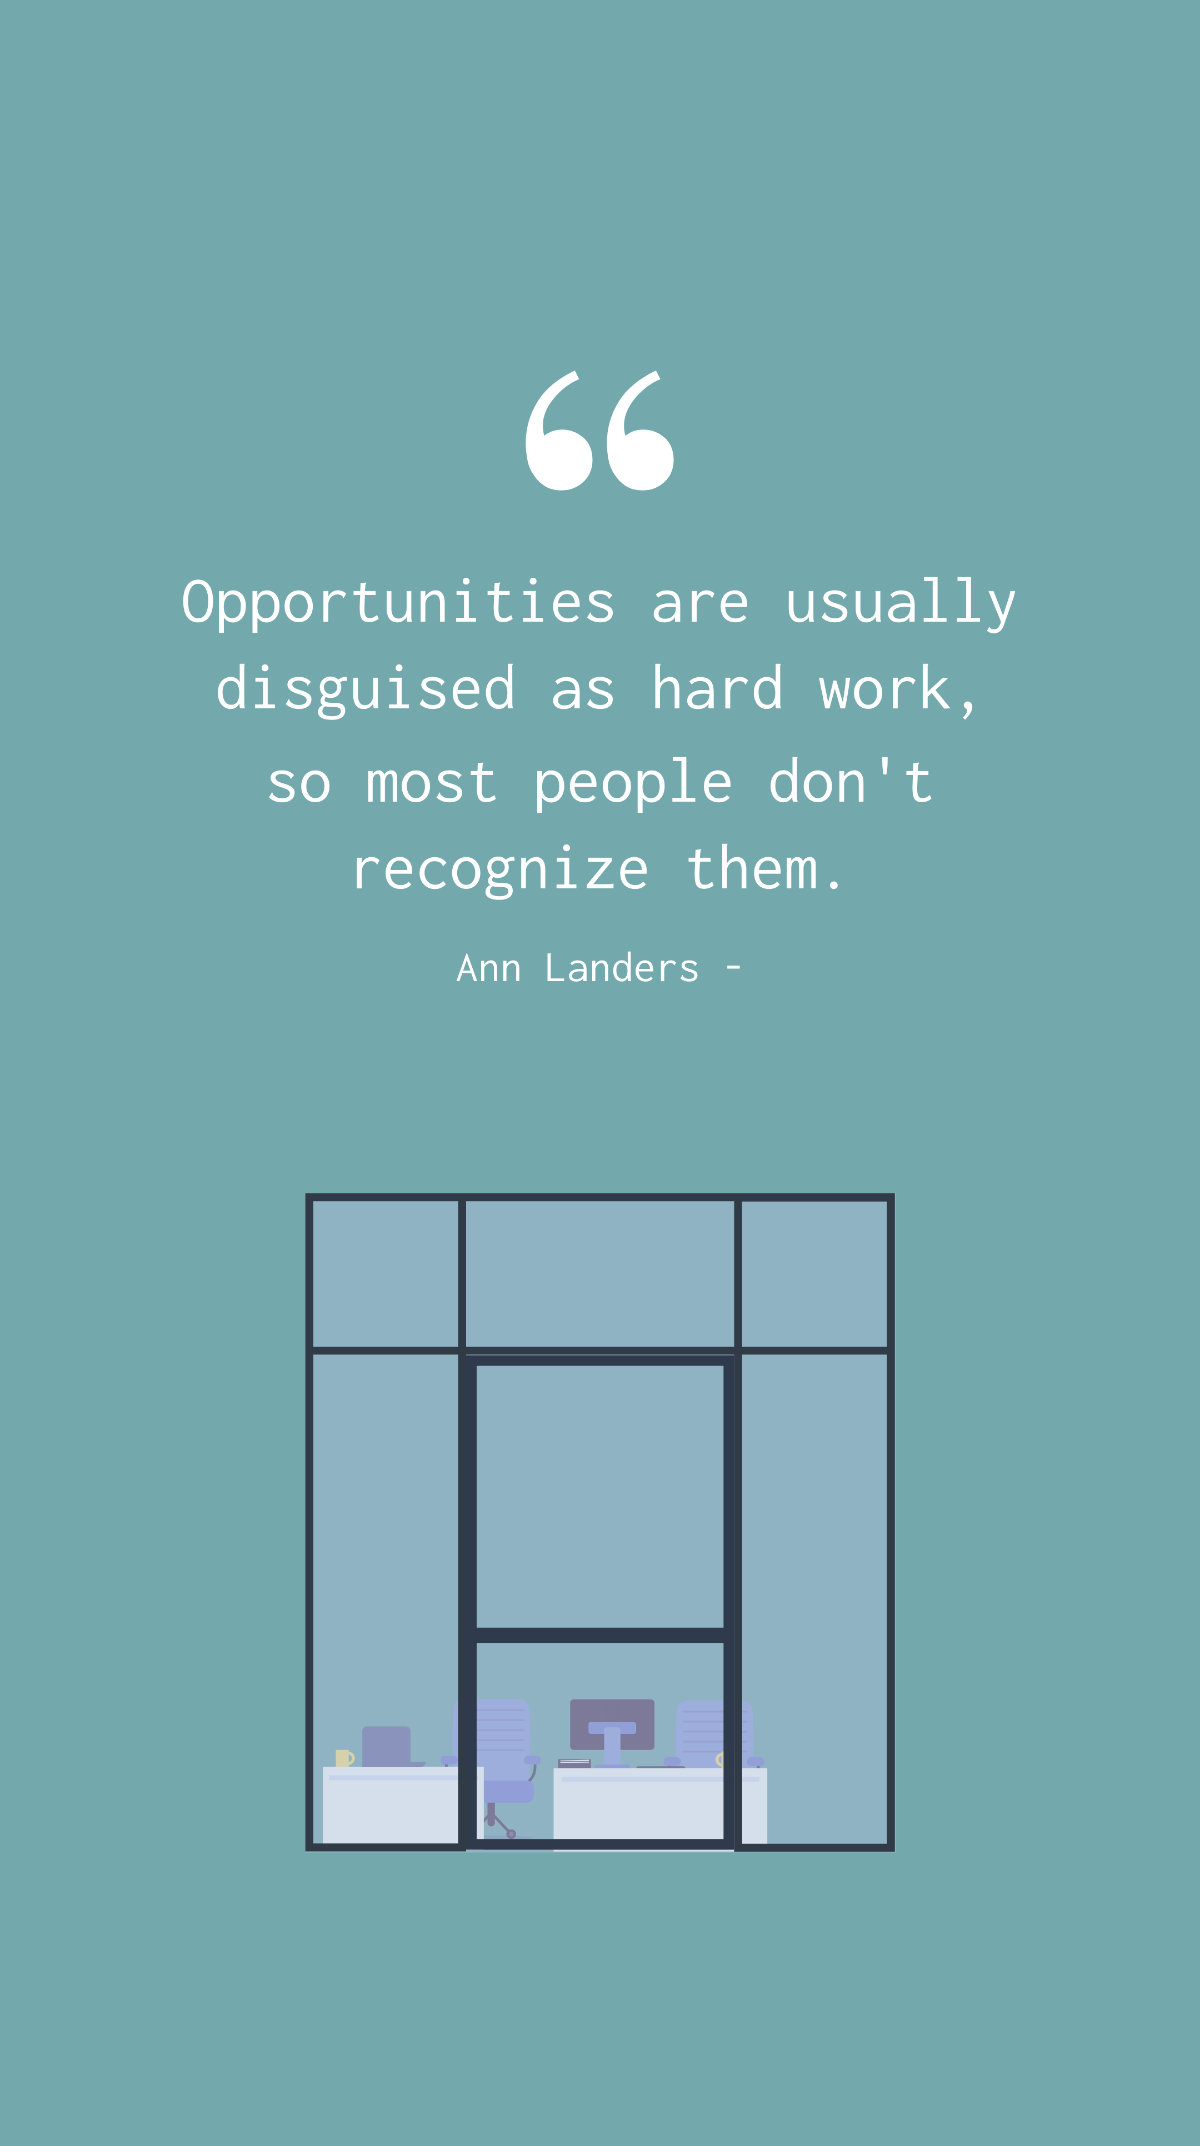 Ann Landers - Opportunities are usually disguised as hard work, so most people don't recognize them.